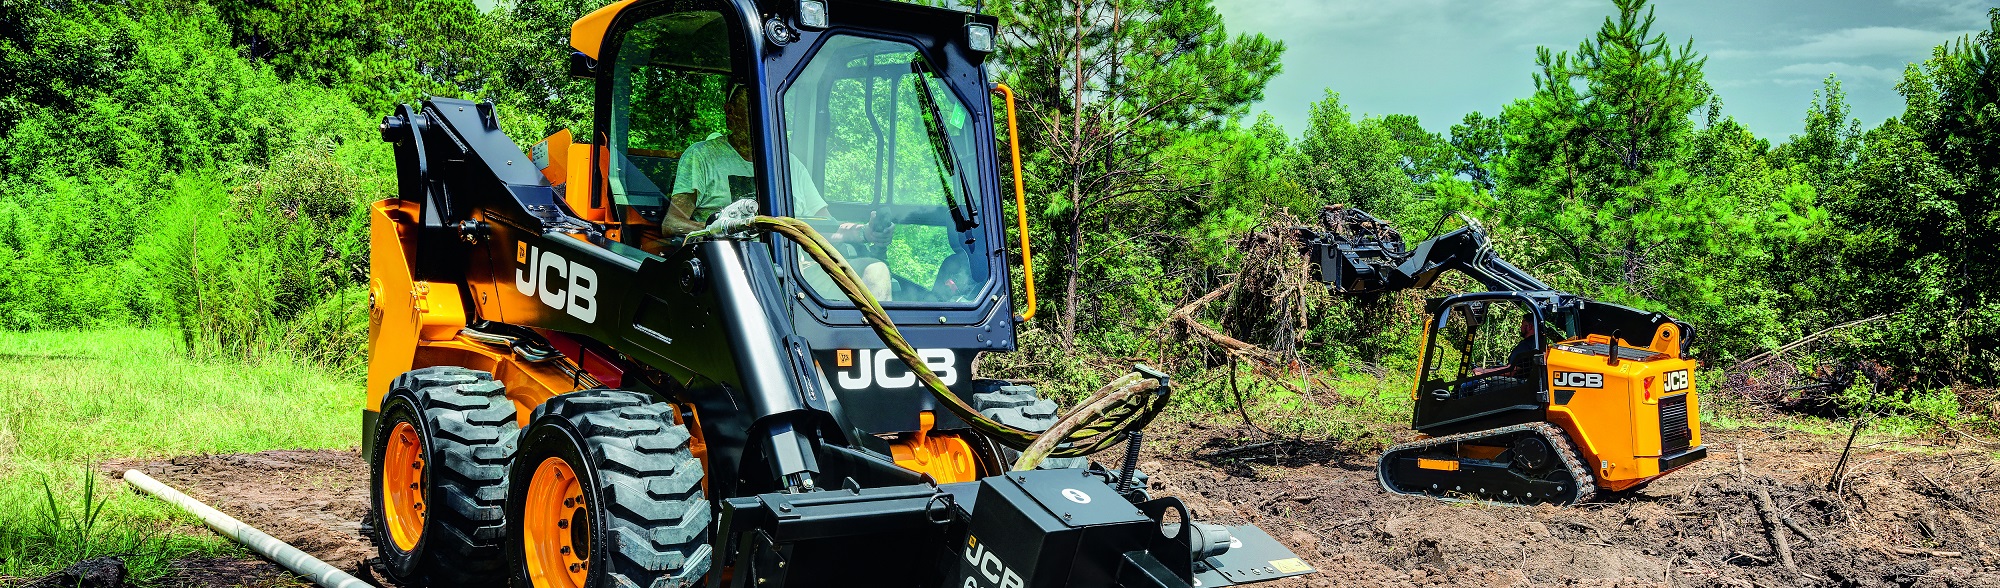 270 Compact Track Loader